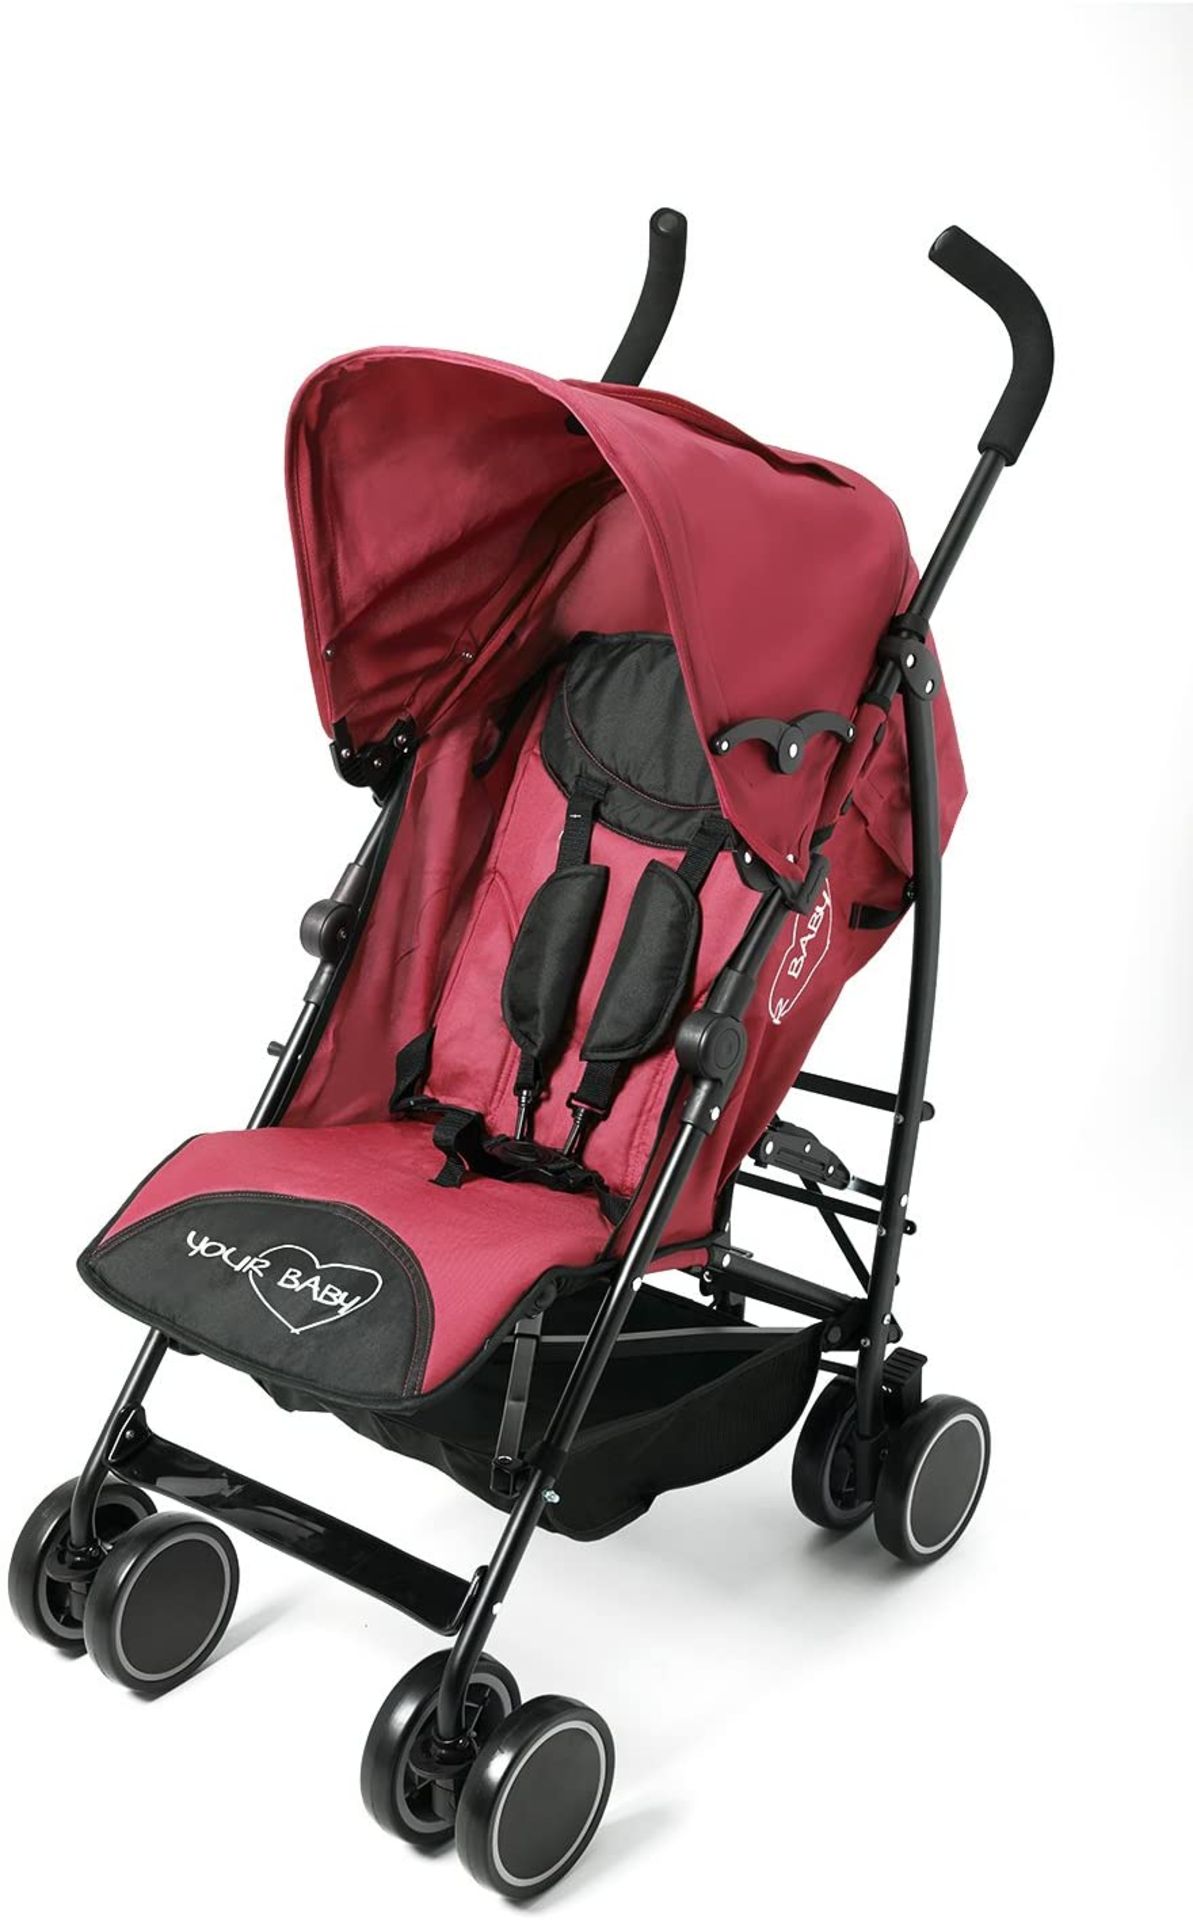 BRAND NEW YOUR BABY CALIFORNIA BABY STROLLER RED